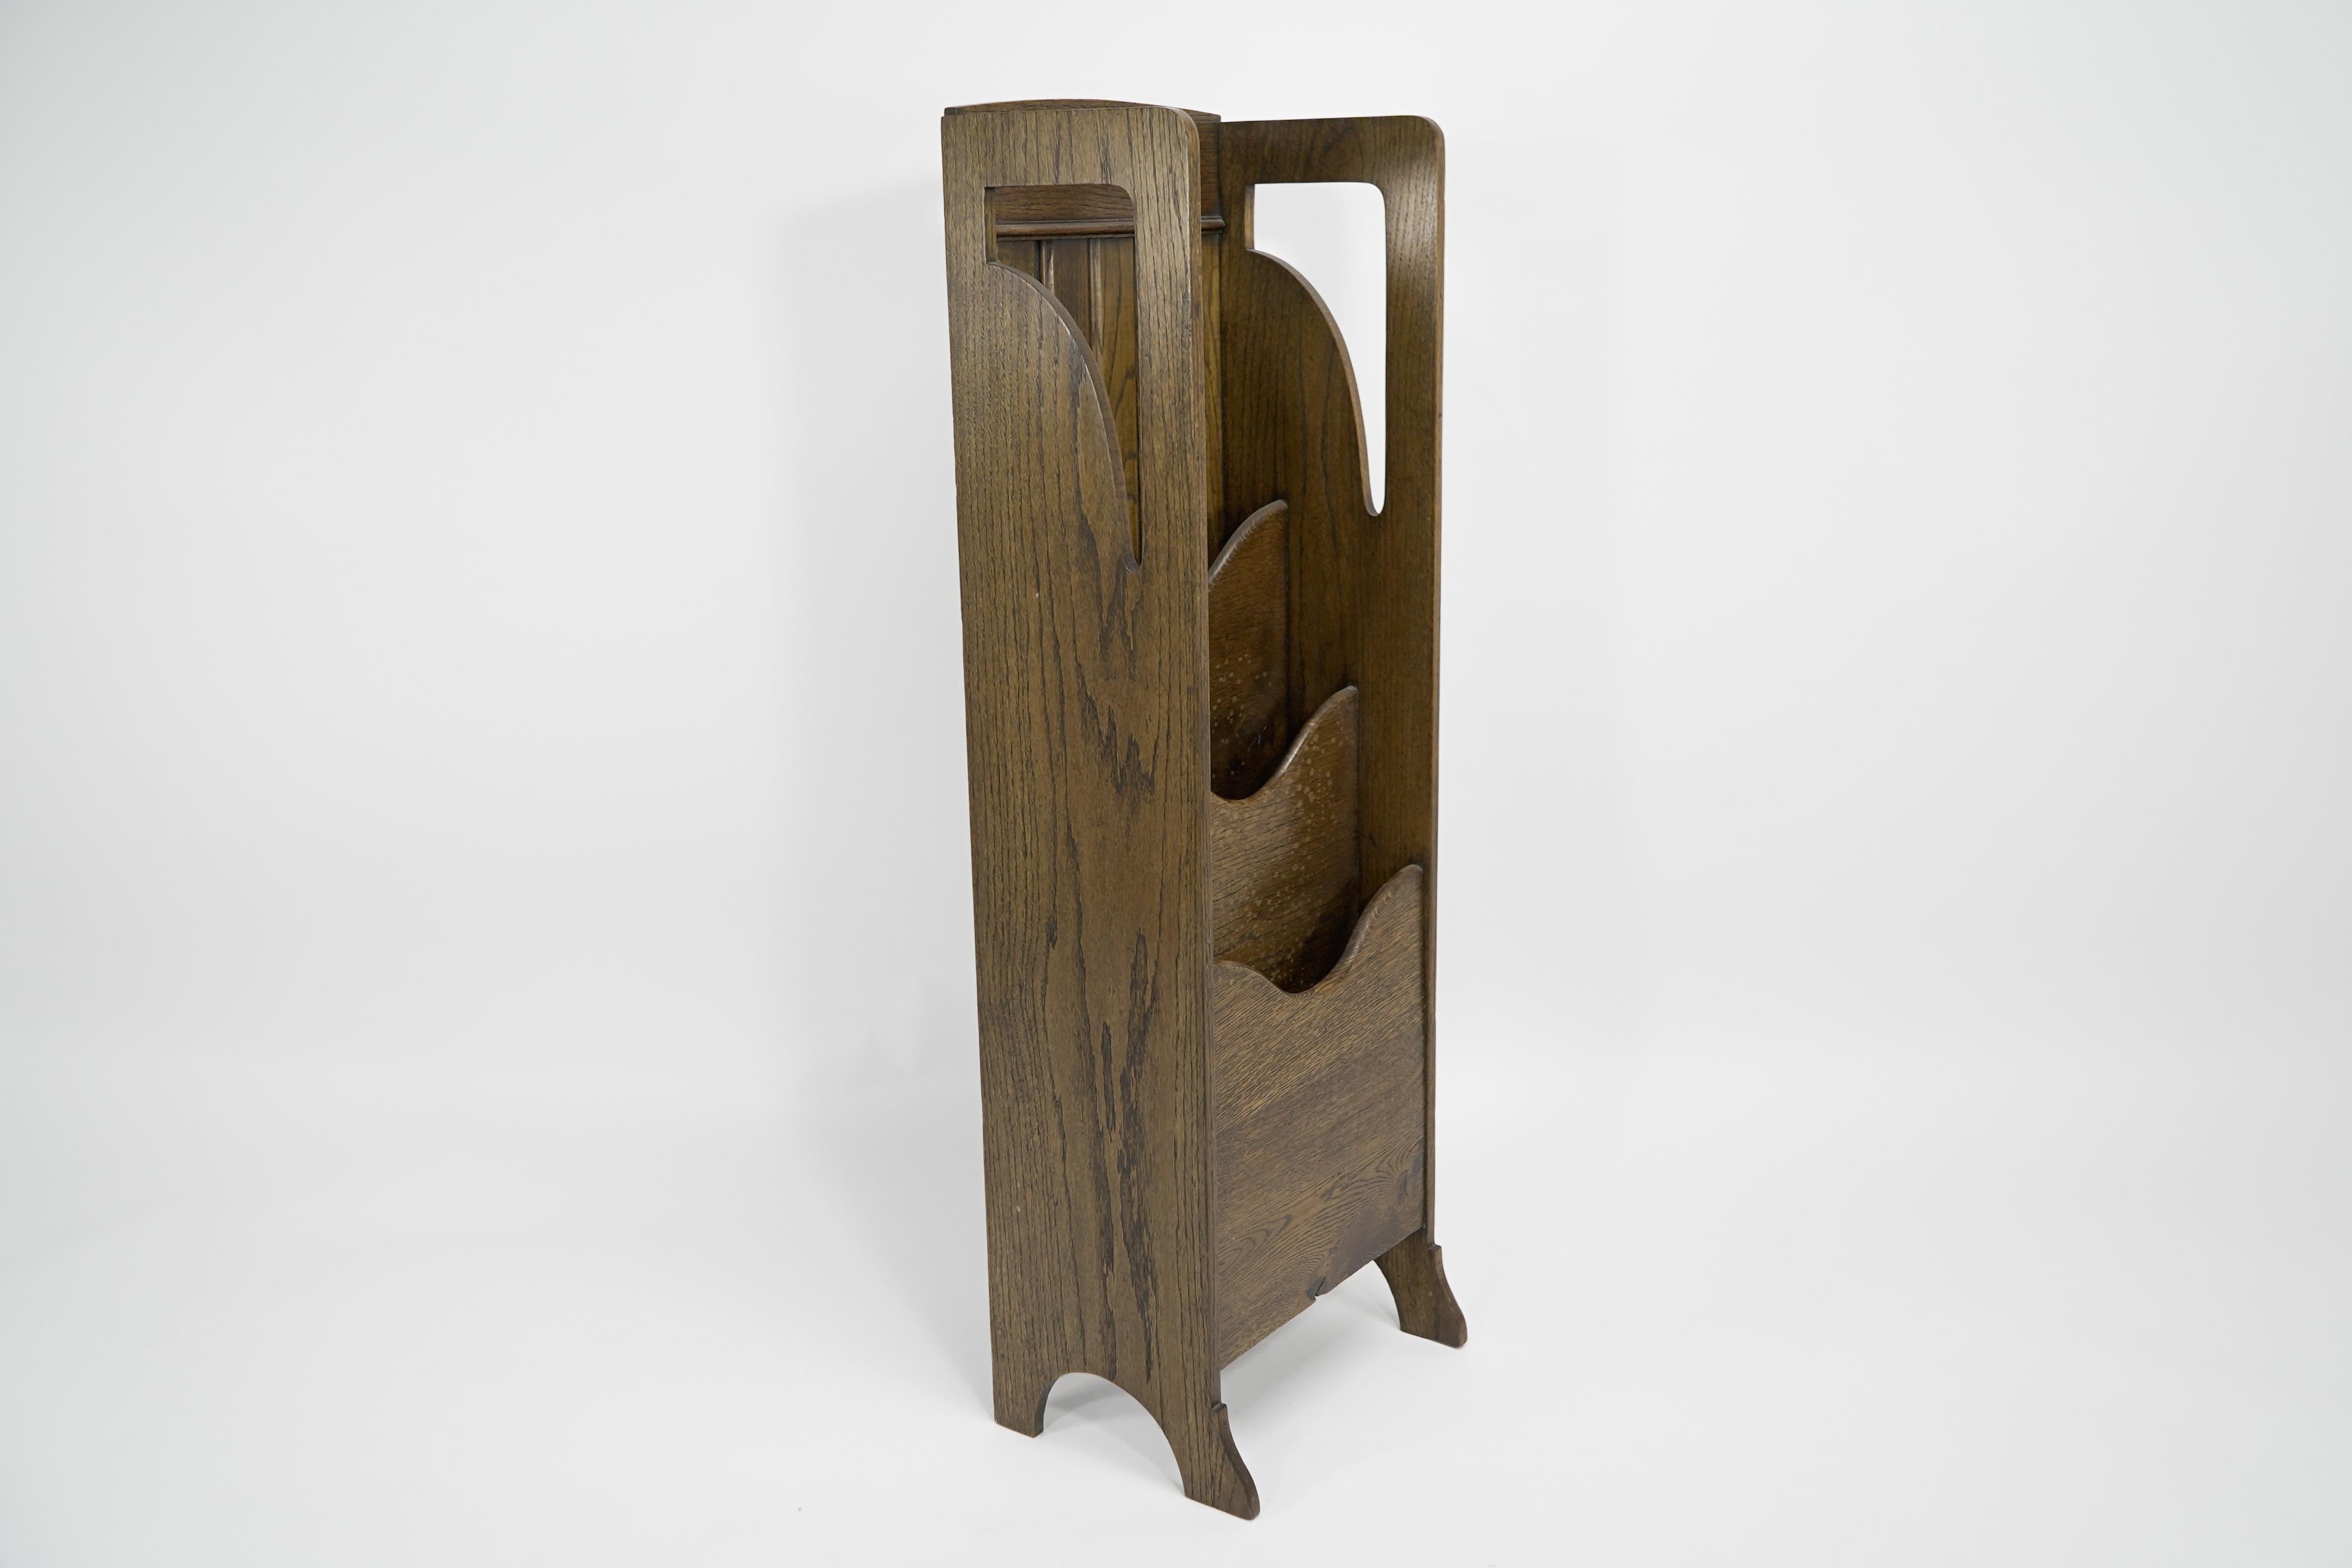 Wylie and Lochhead attributed. A Glasgow Style Arts and Crafts oak magazine or paper rack with waterfall style compartments and stylized cut-outs to the top.